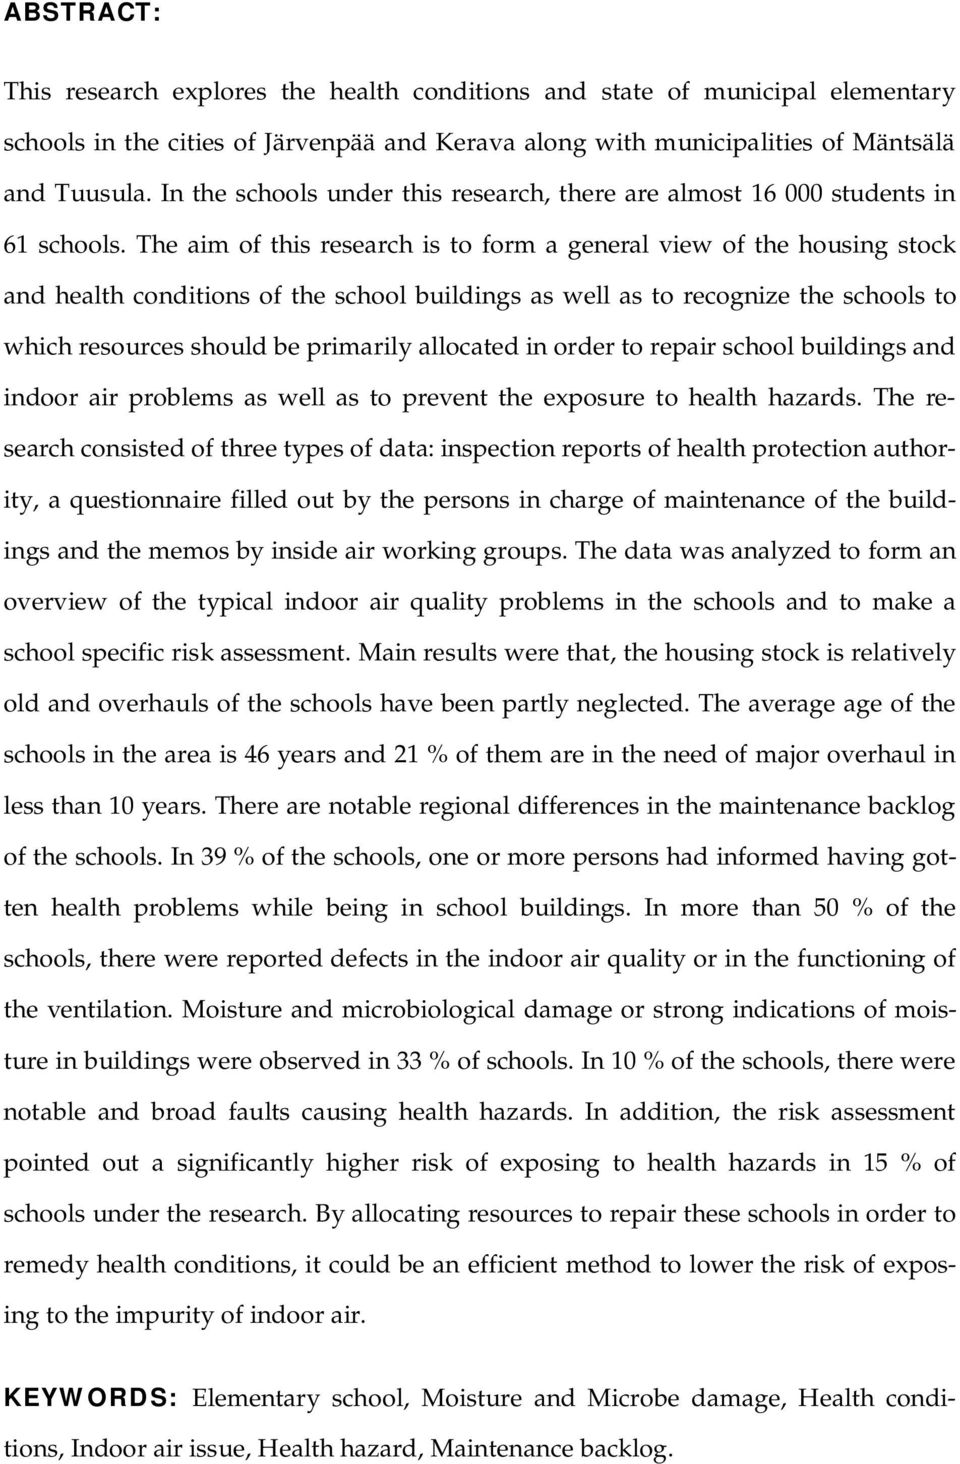 The aim of this research is to form a general view of the housing stock and health conditions of the school buildings as well as to recognize the schools to which resources should be primarily